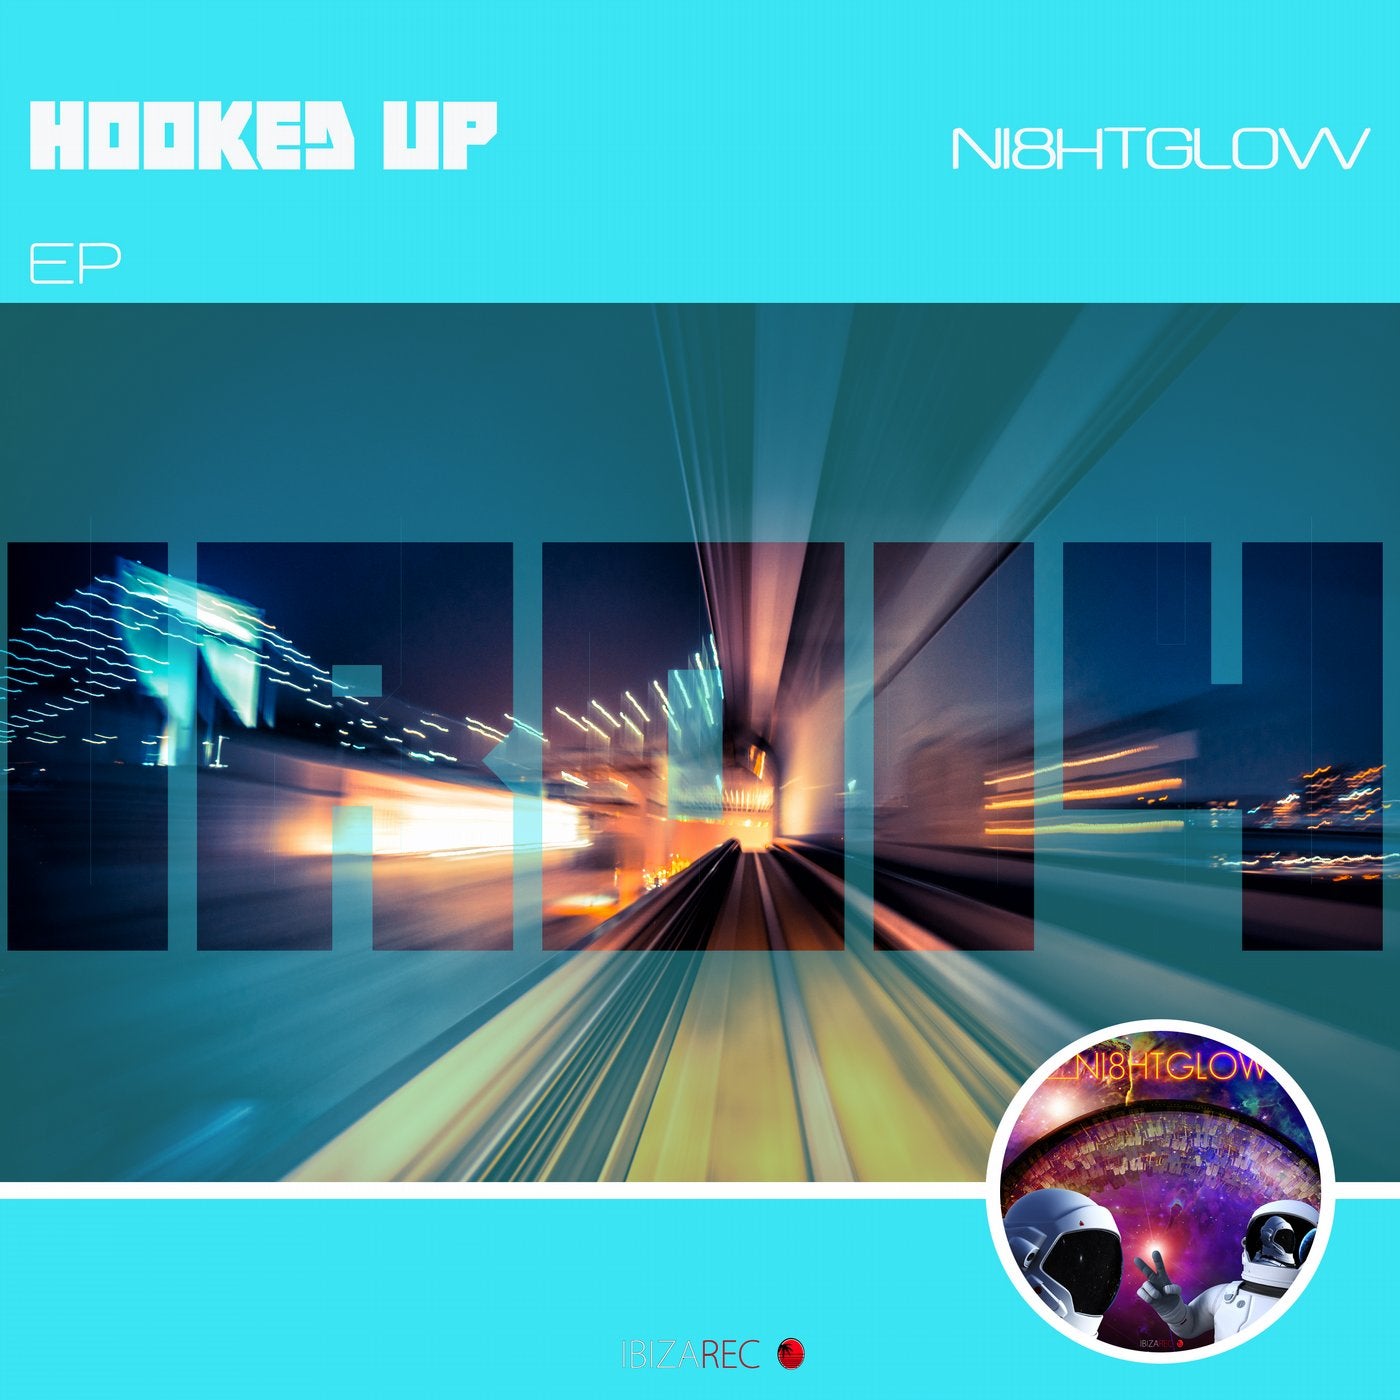 Hooked up EP